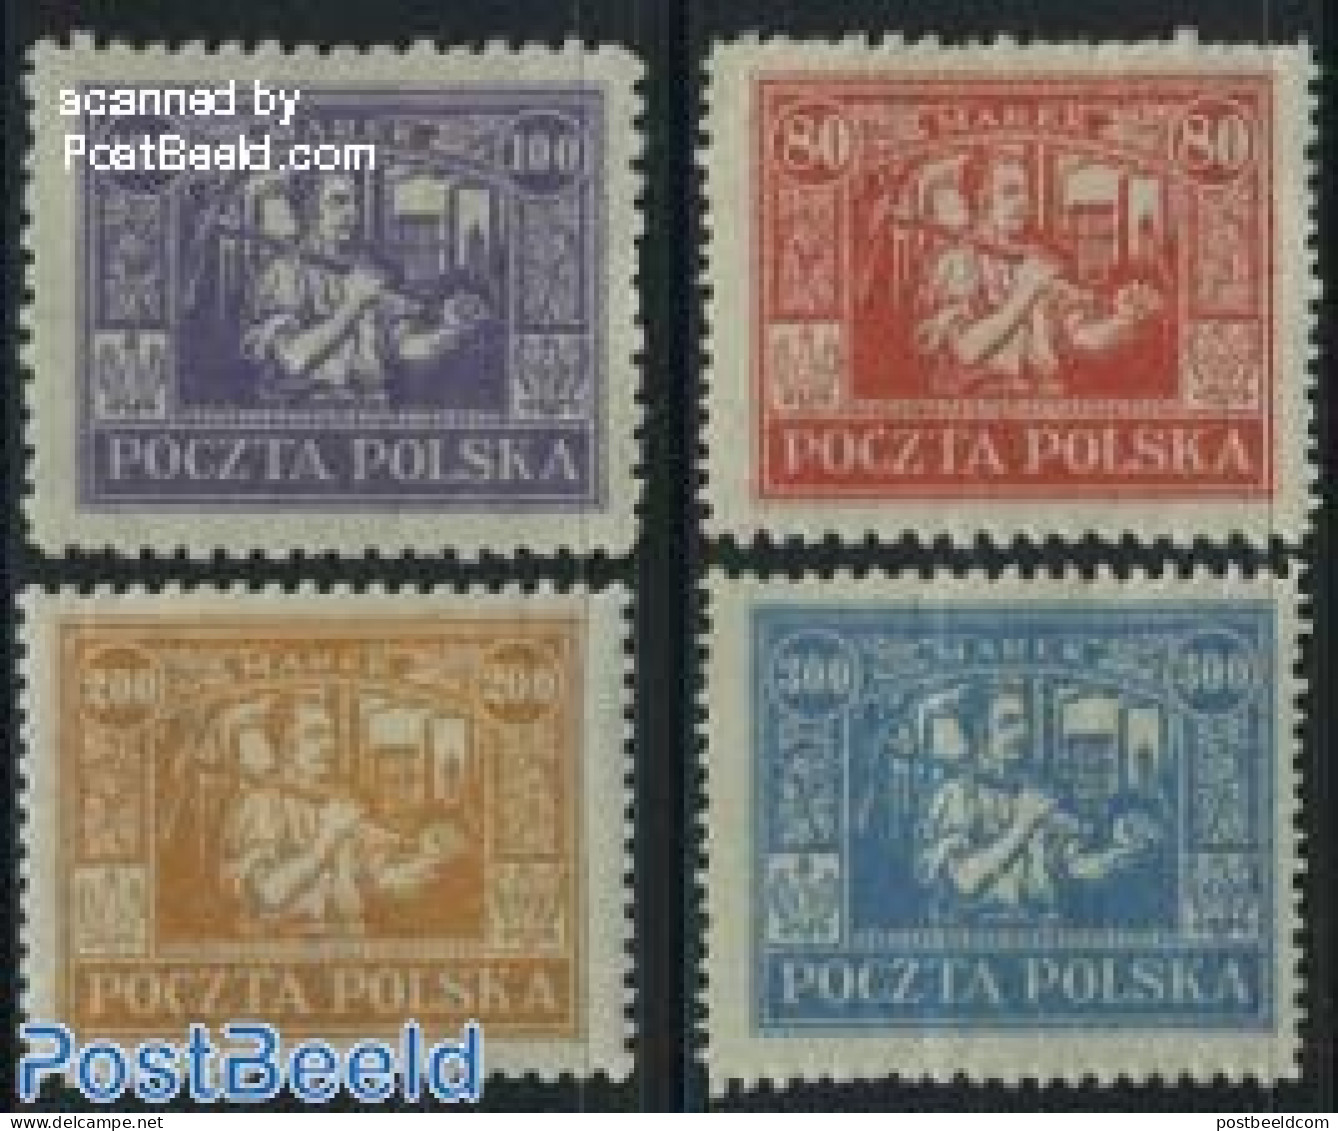 Poland 1923 East Upper Silesia, Definitives 4v, Mint NH - Unused Stamps